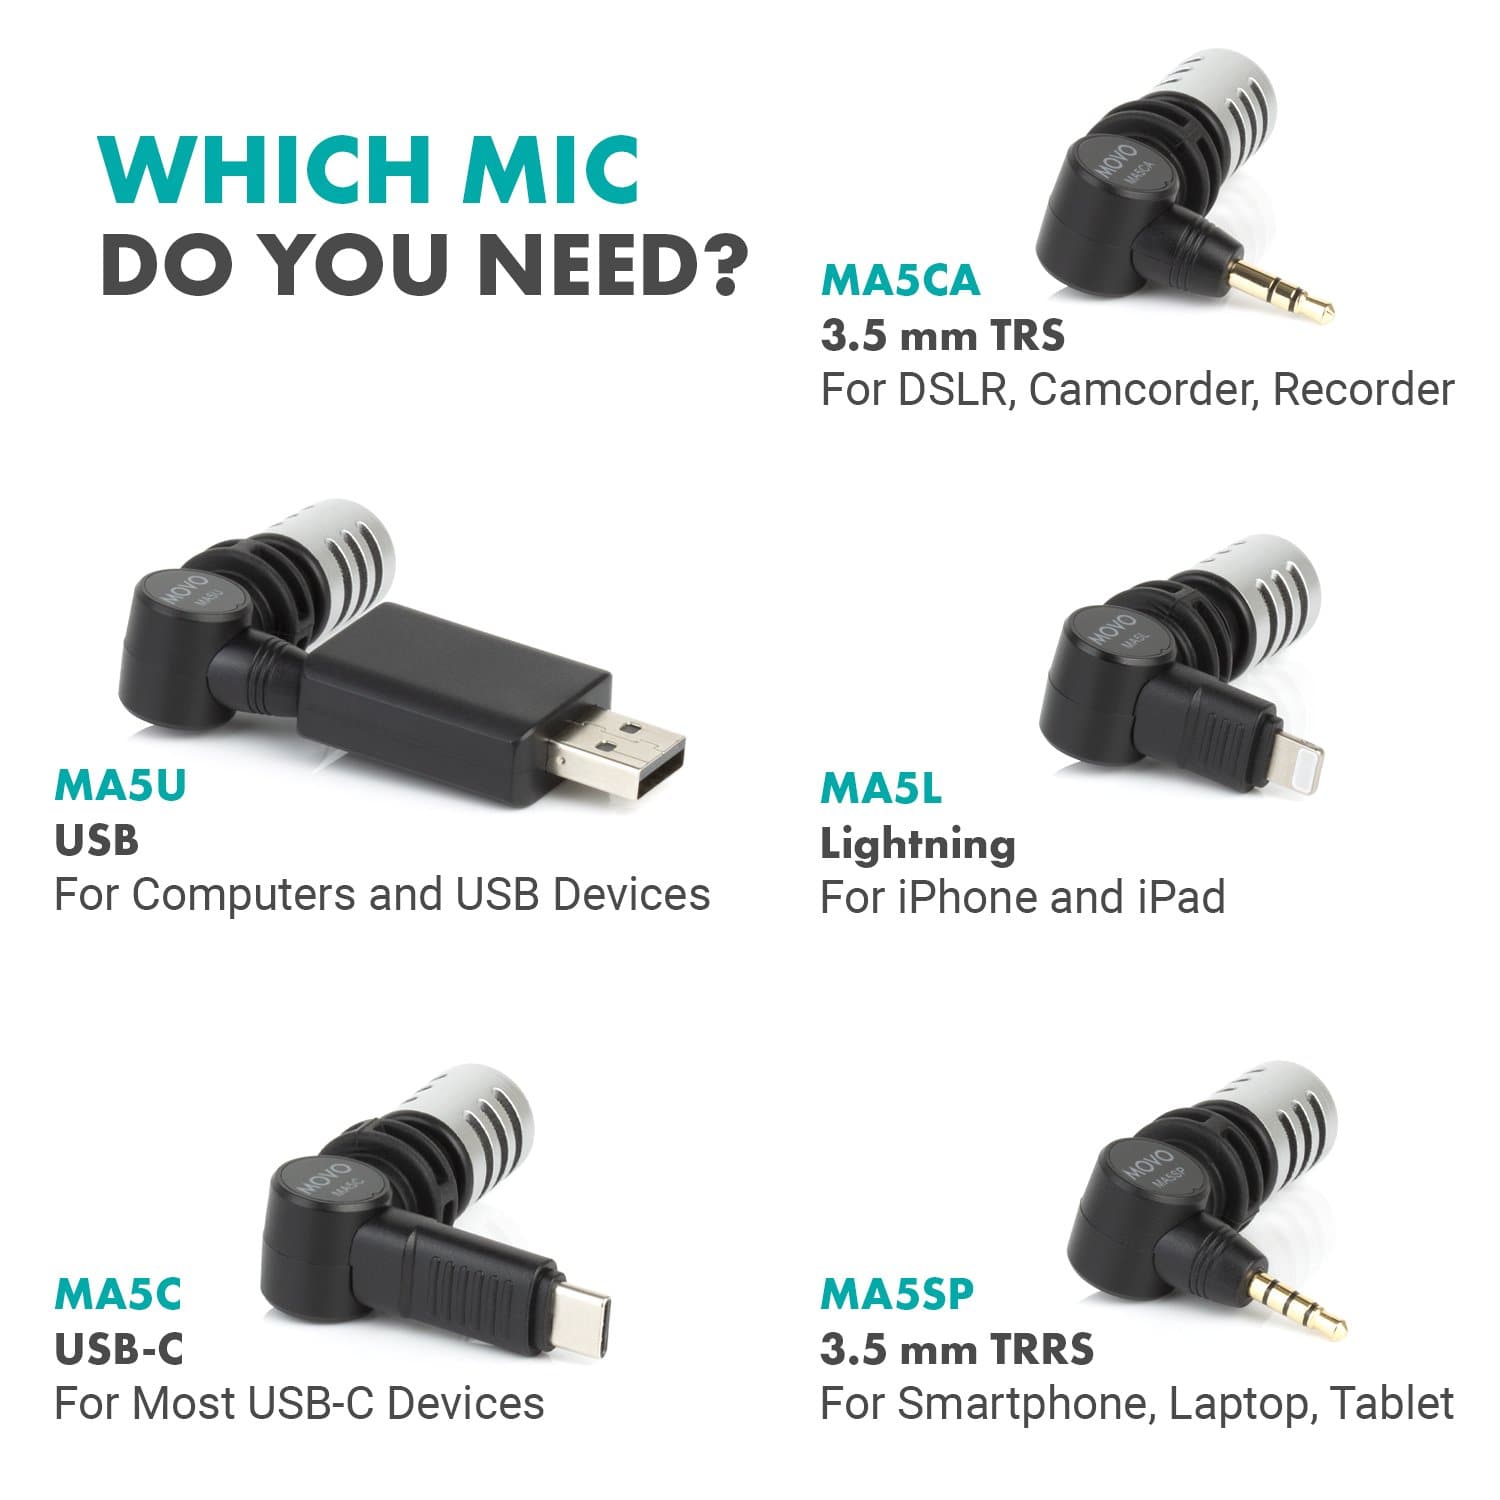 MA5C | Mini Microphone USB-C Android Smartphones Tablets |